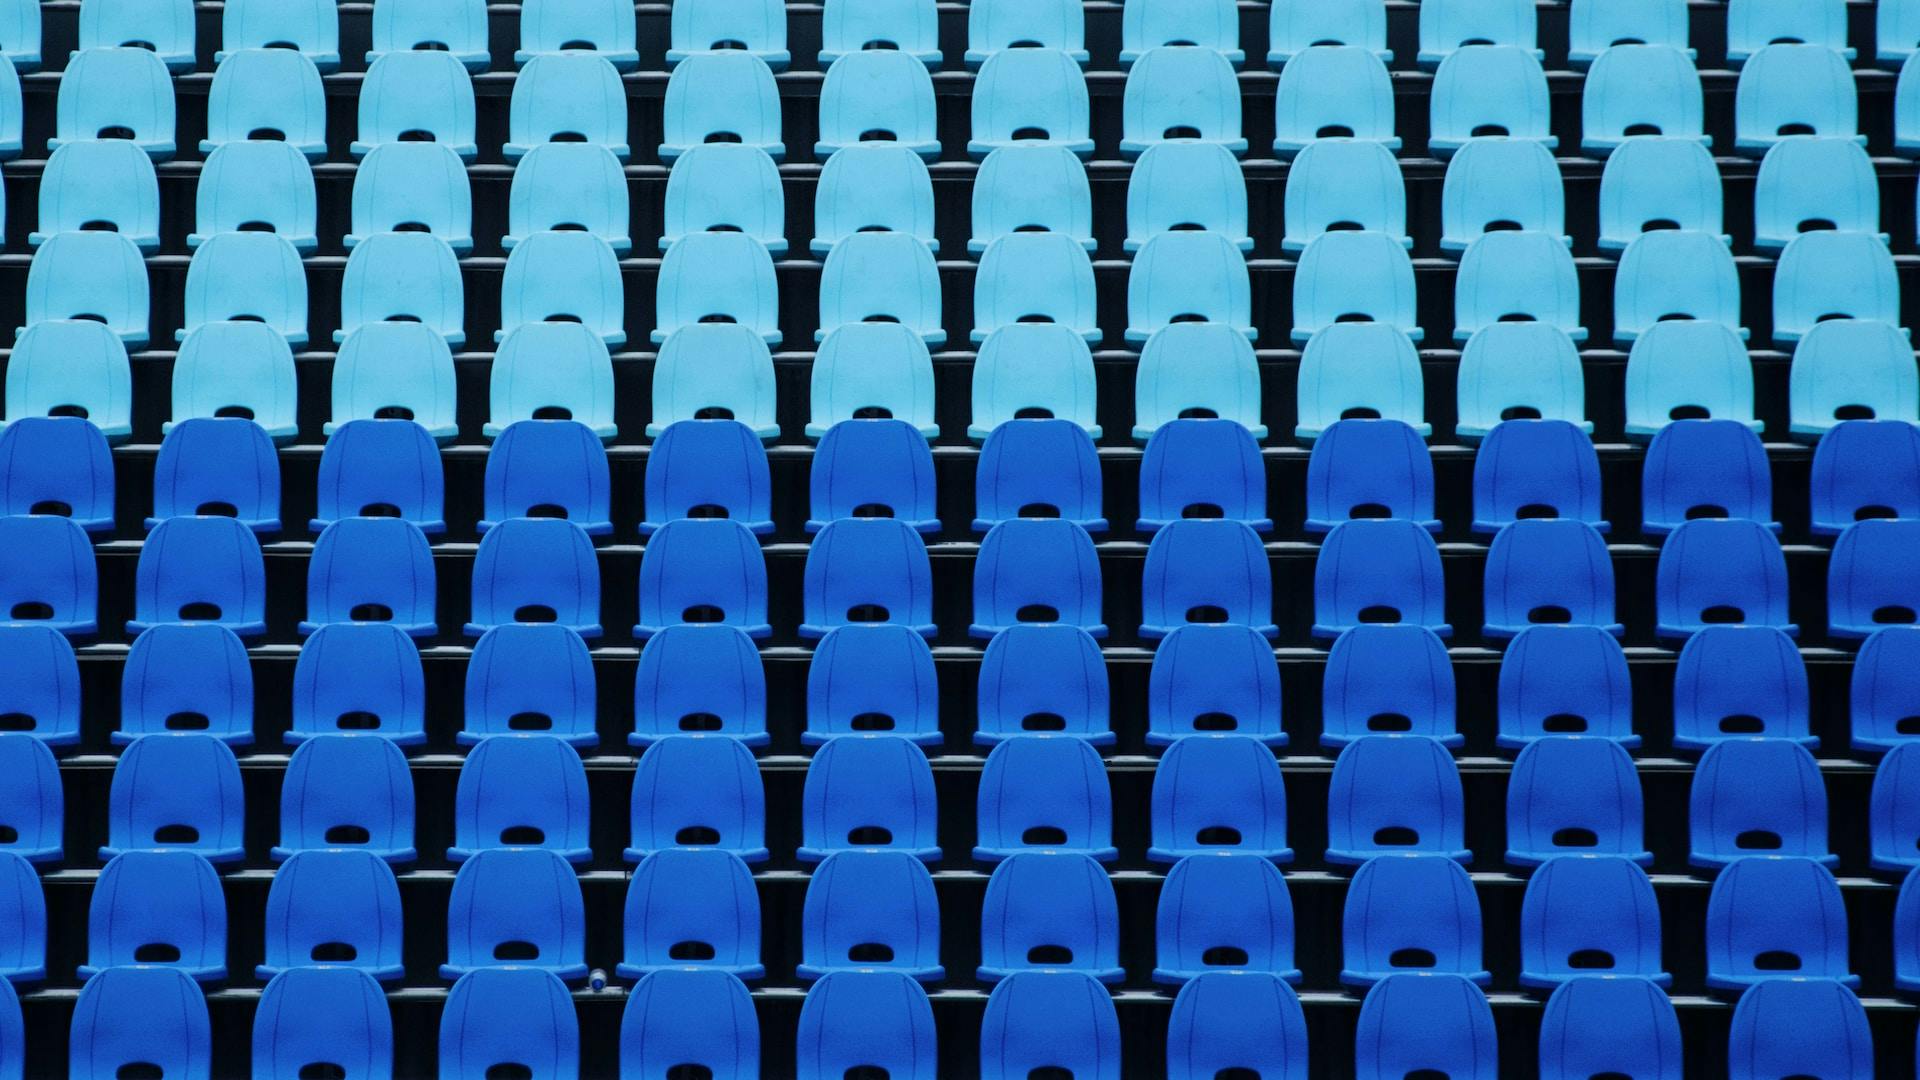 Several rows of blue bleachers